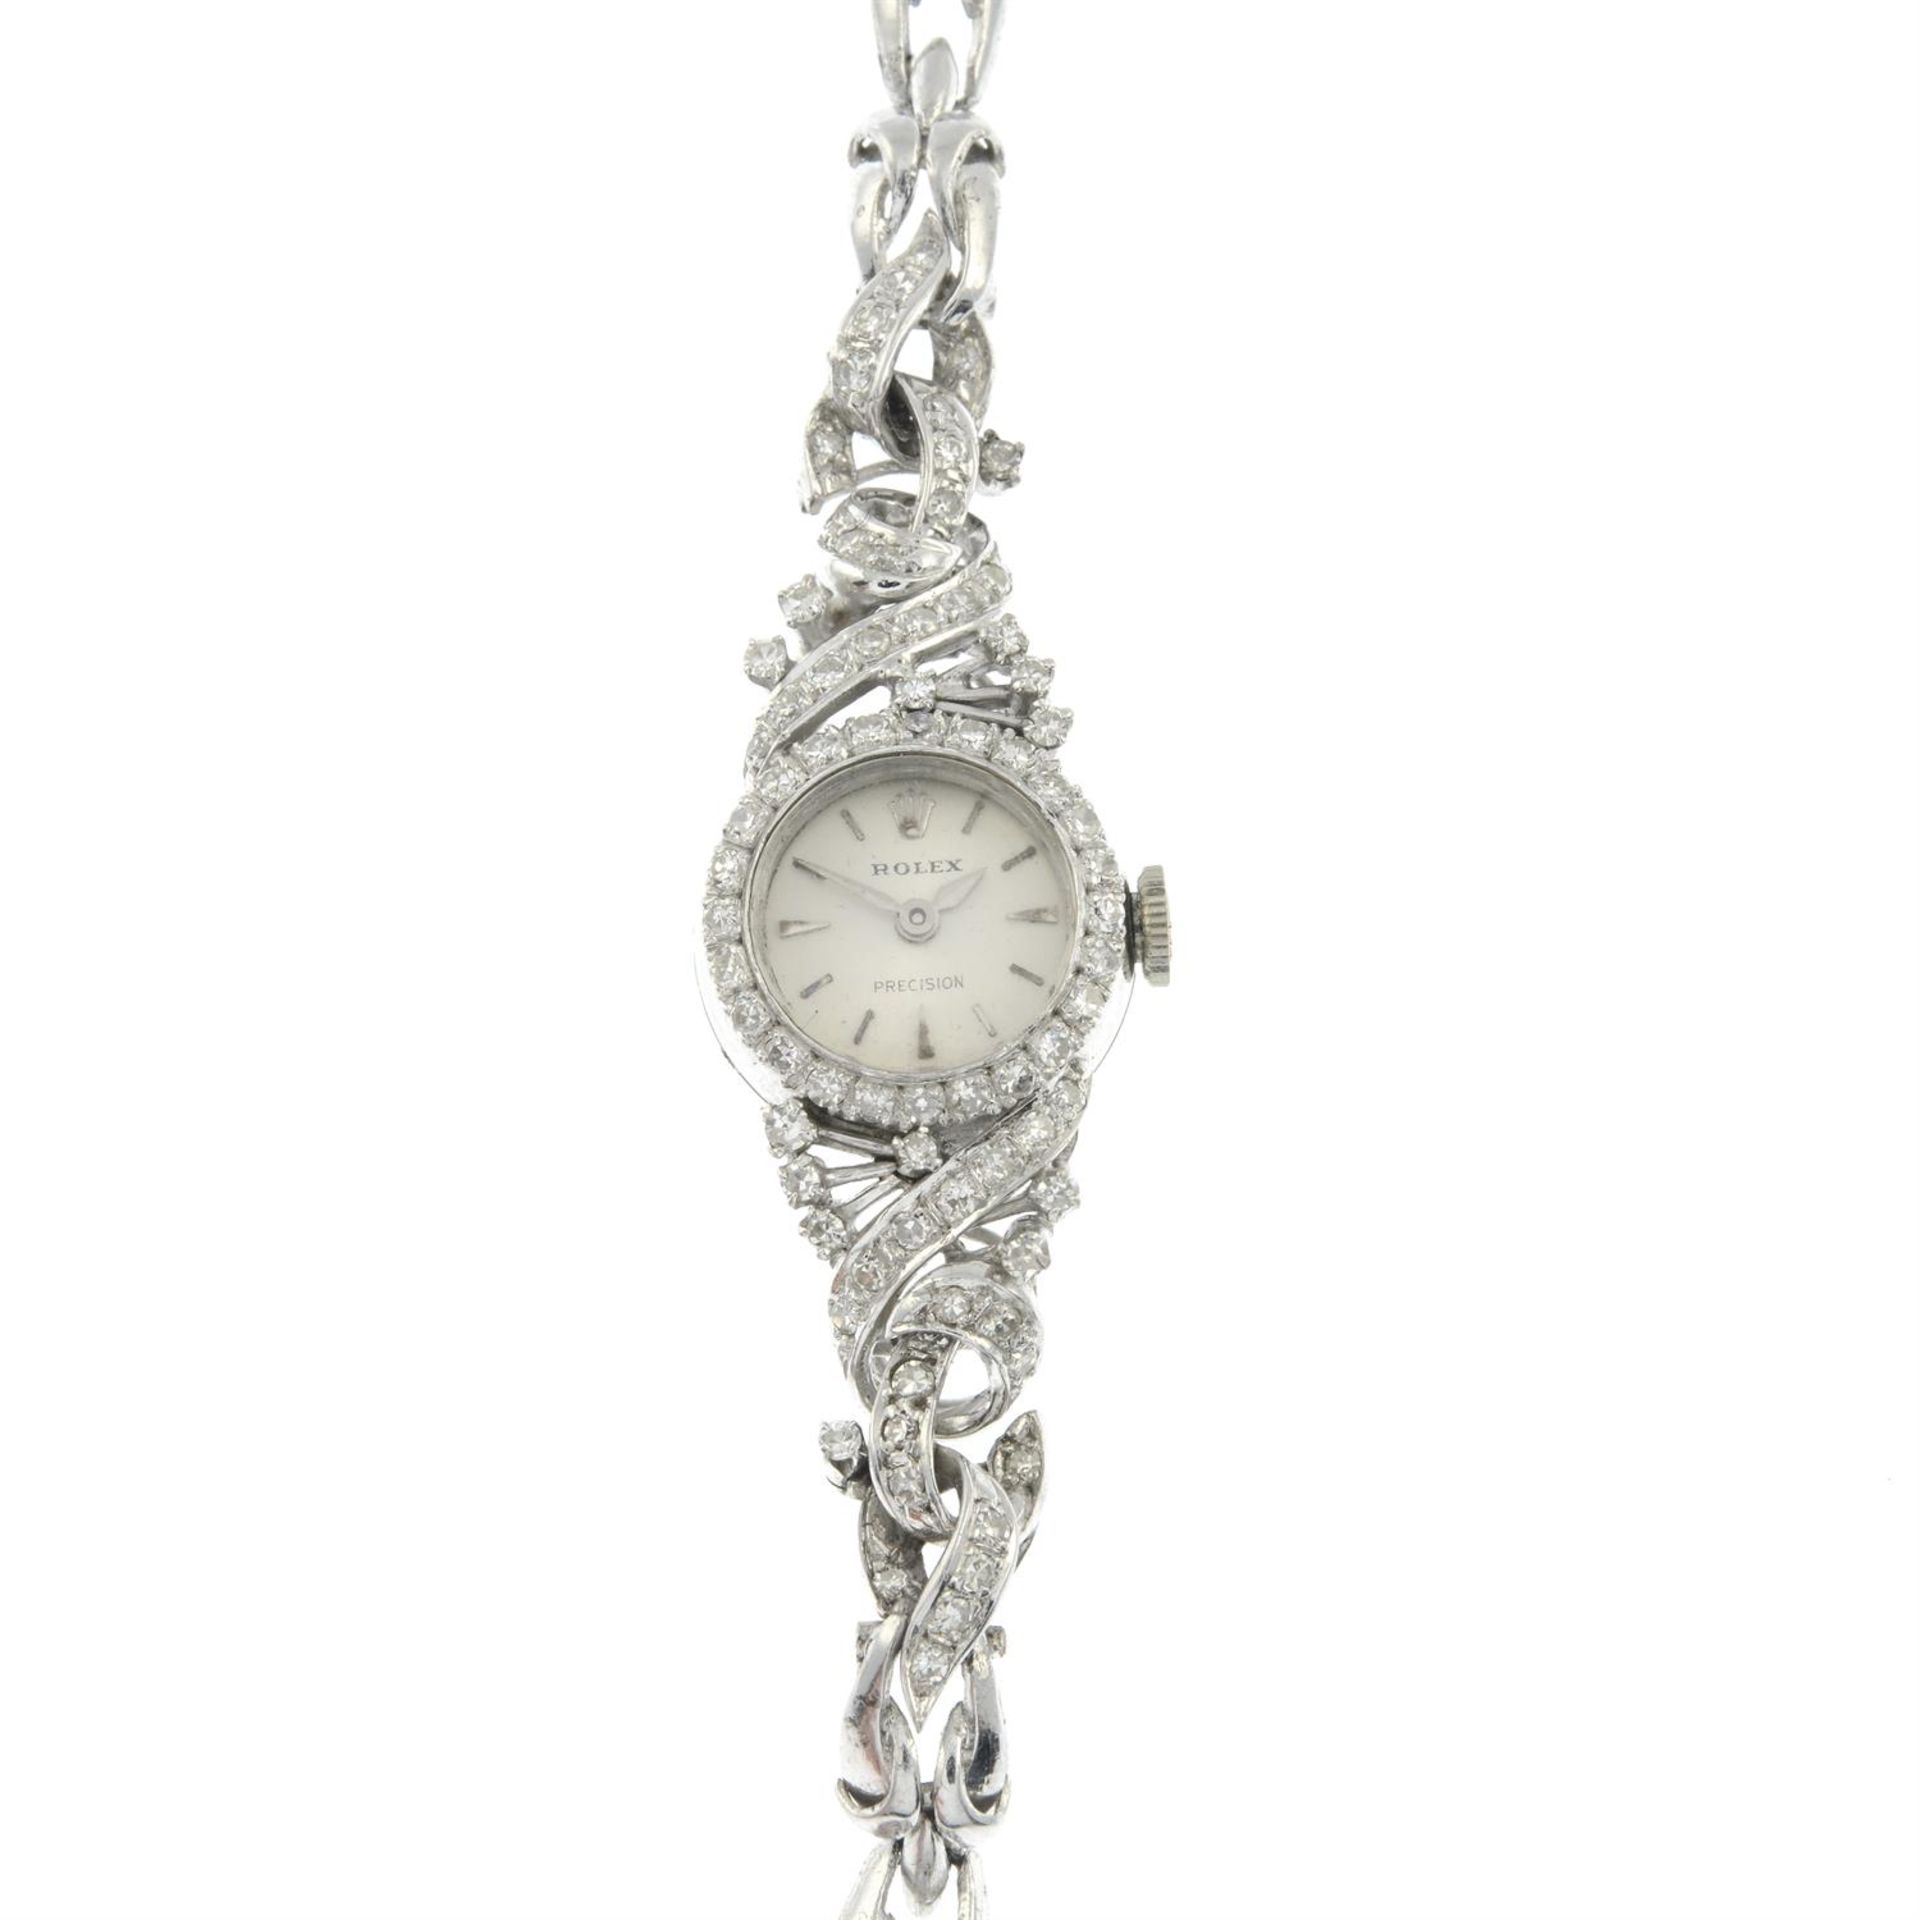 A lady's mid 20th century 18ct gold Haute Joaillerie Precision cocktail watch, by Rolex, circa 1959, - Image 2 of 4